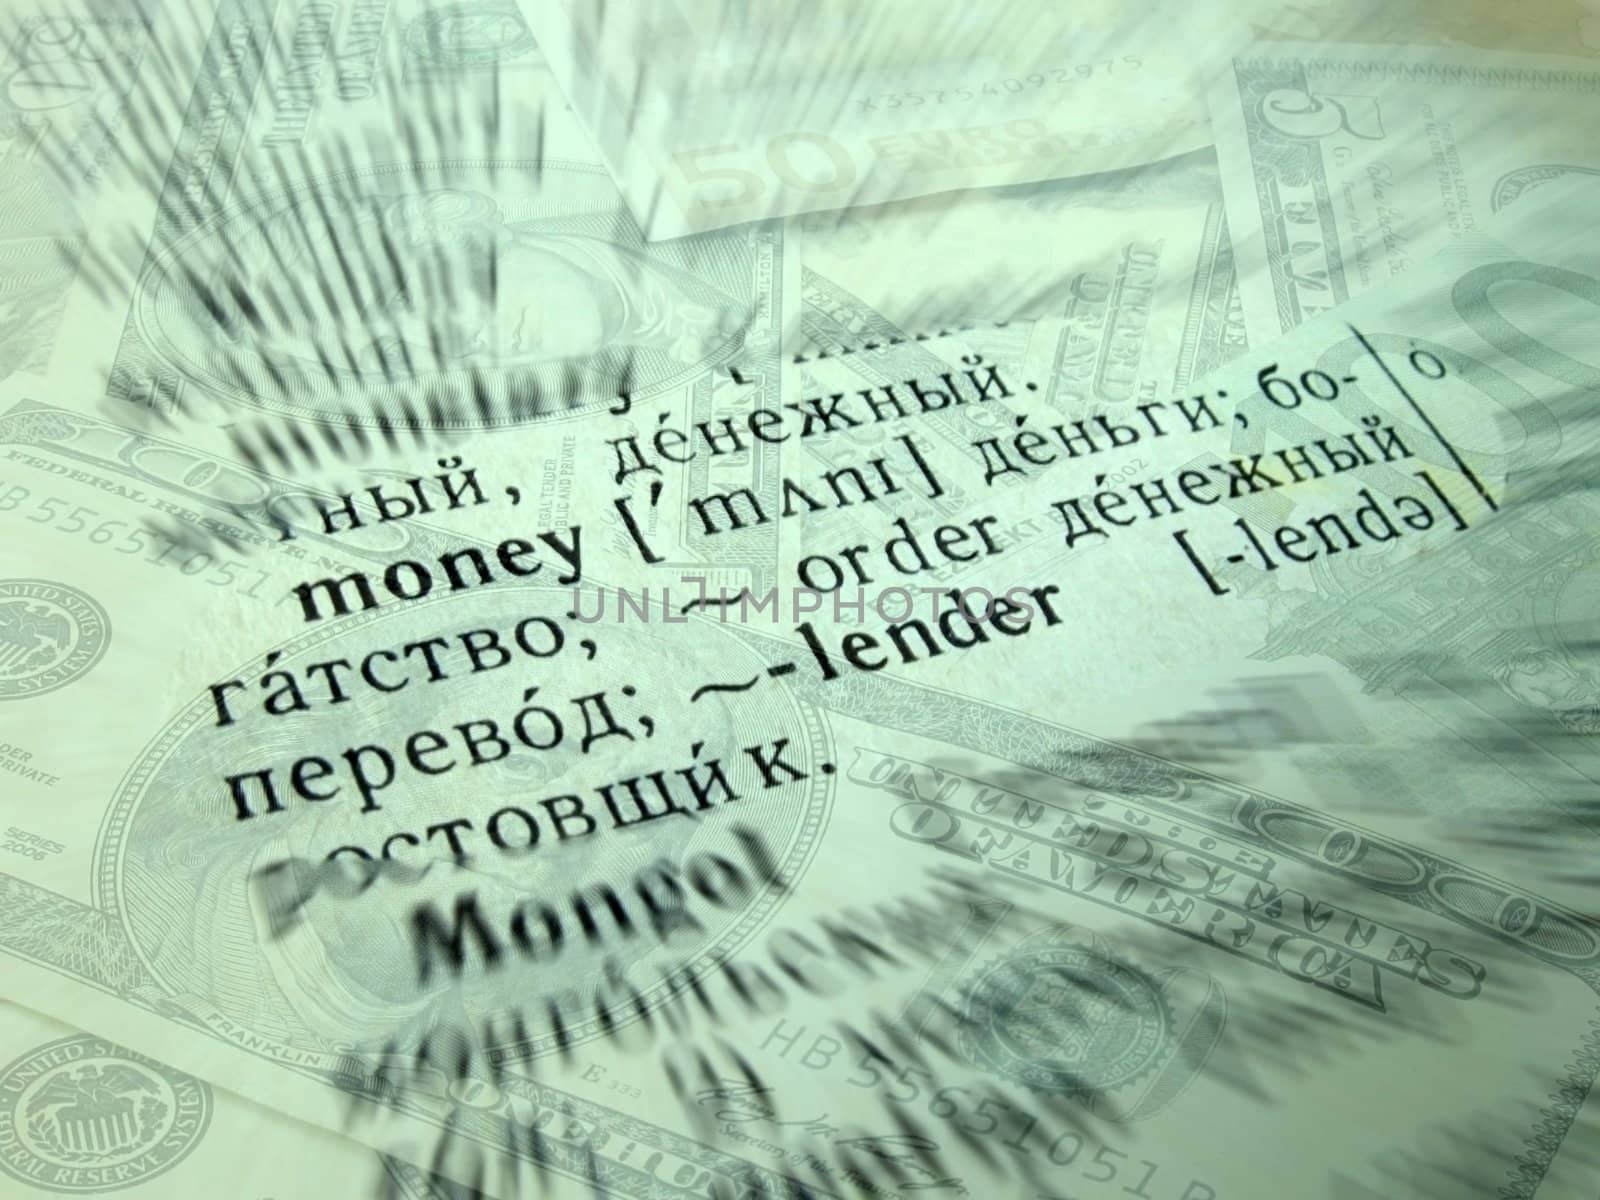 translation of word money in english-russian dictionary